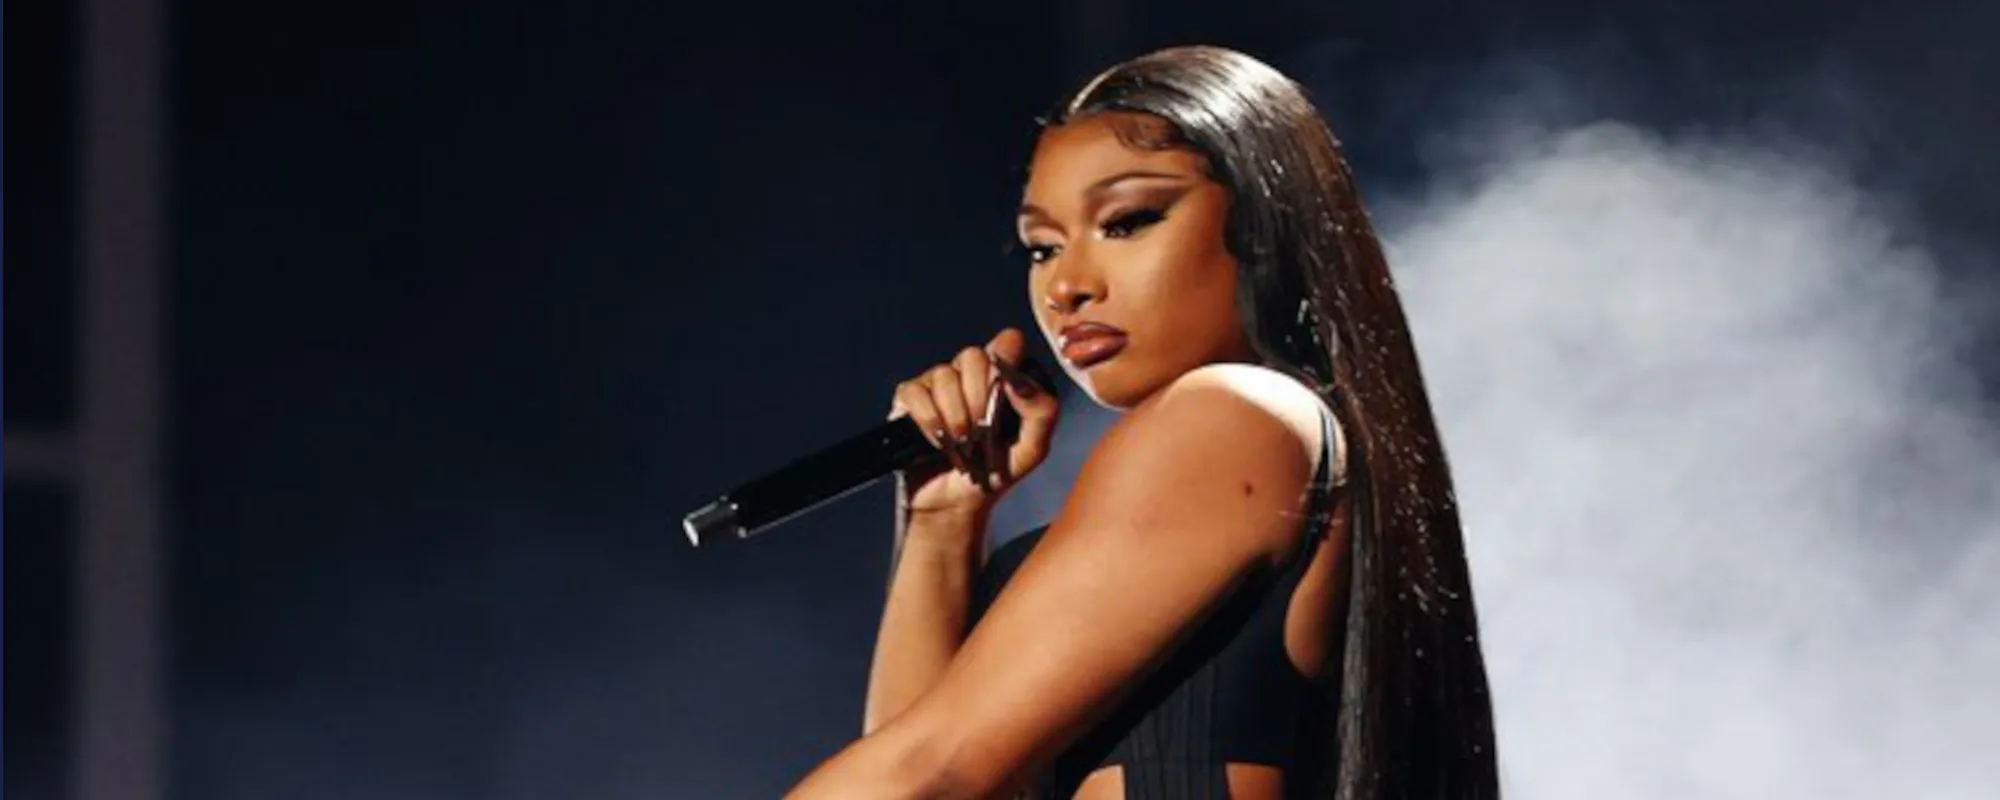 Megan Thee Stallion to Face Tory Lanez in Trial Today – What We Know So Far